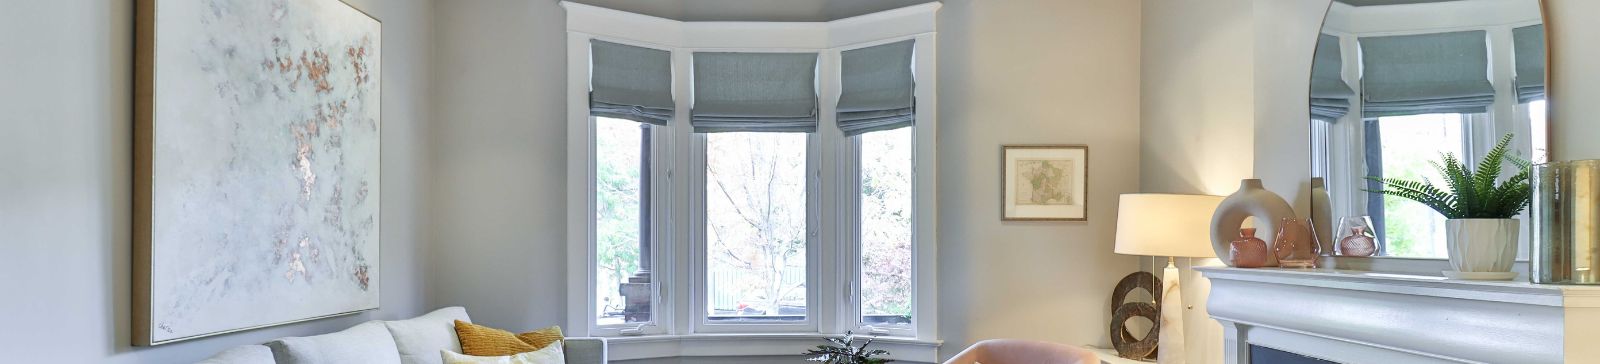 Everything You Need to Know About Roman Shades for Windows